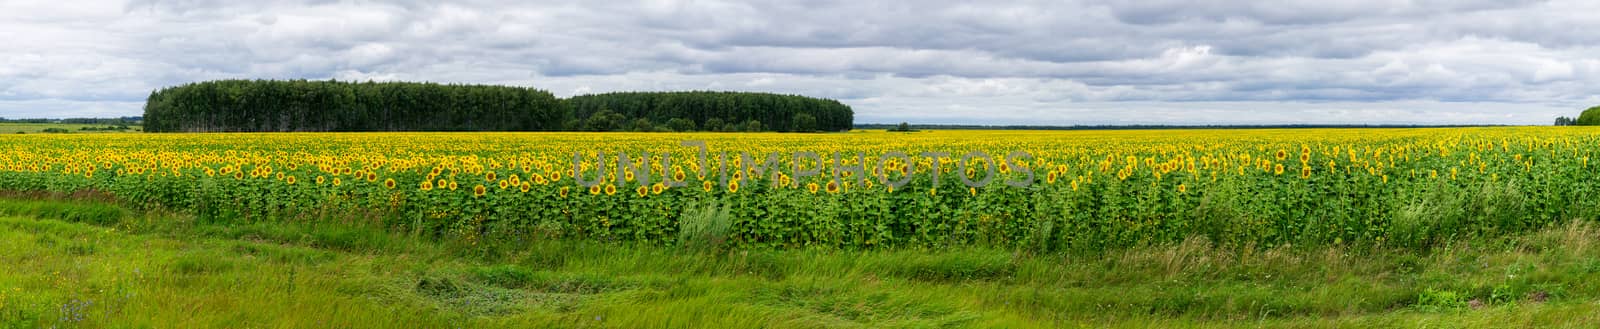 The photo shows a field of sunflowers